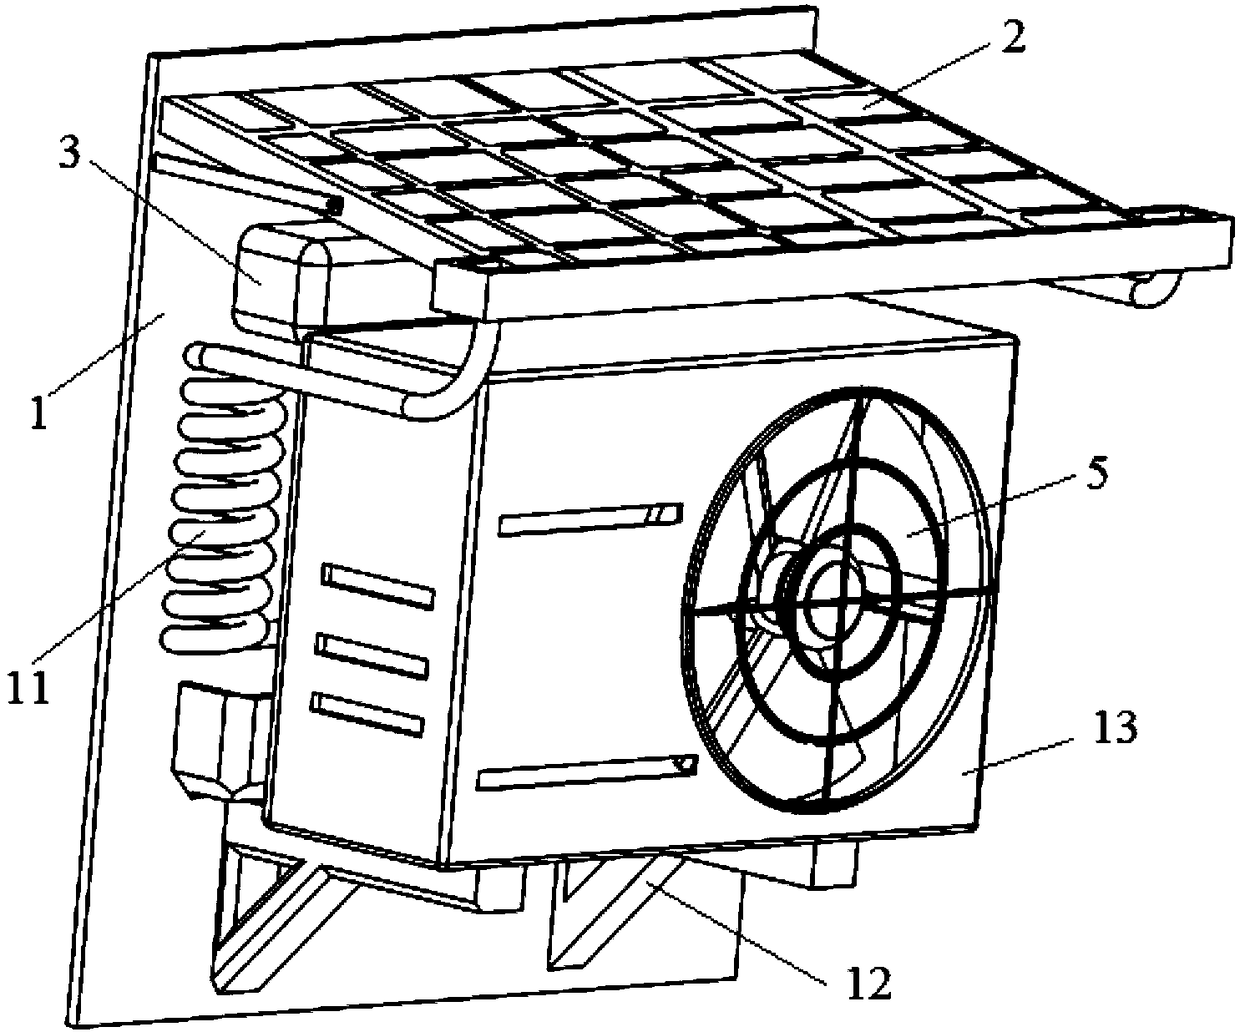 Self-powered heat dissipation shell of air conditioner outdoor unit